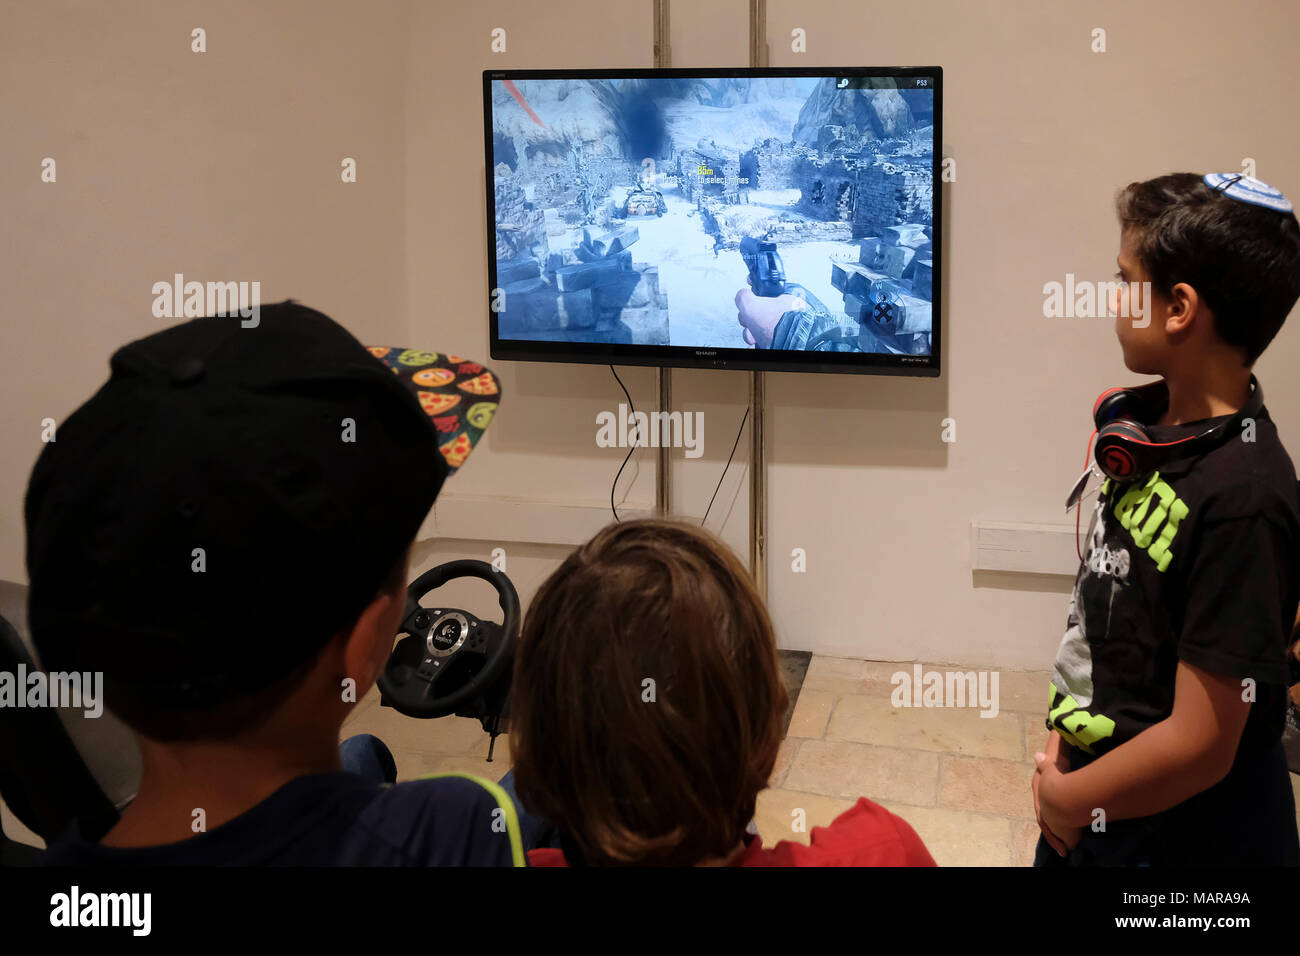 Israeli children playing violent simulated war video game with a  PlayStation 3 (PS3) console in Jerusalem Israel Stock Photo - Alamy